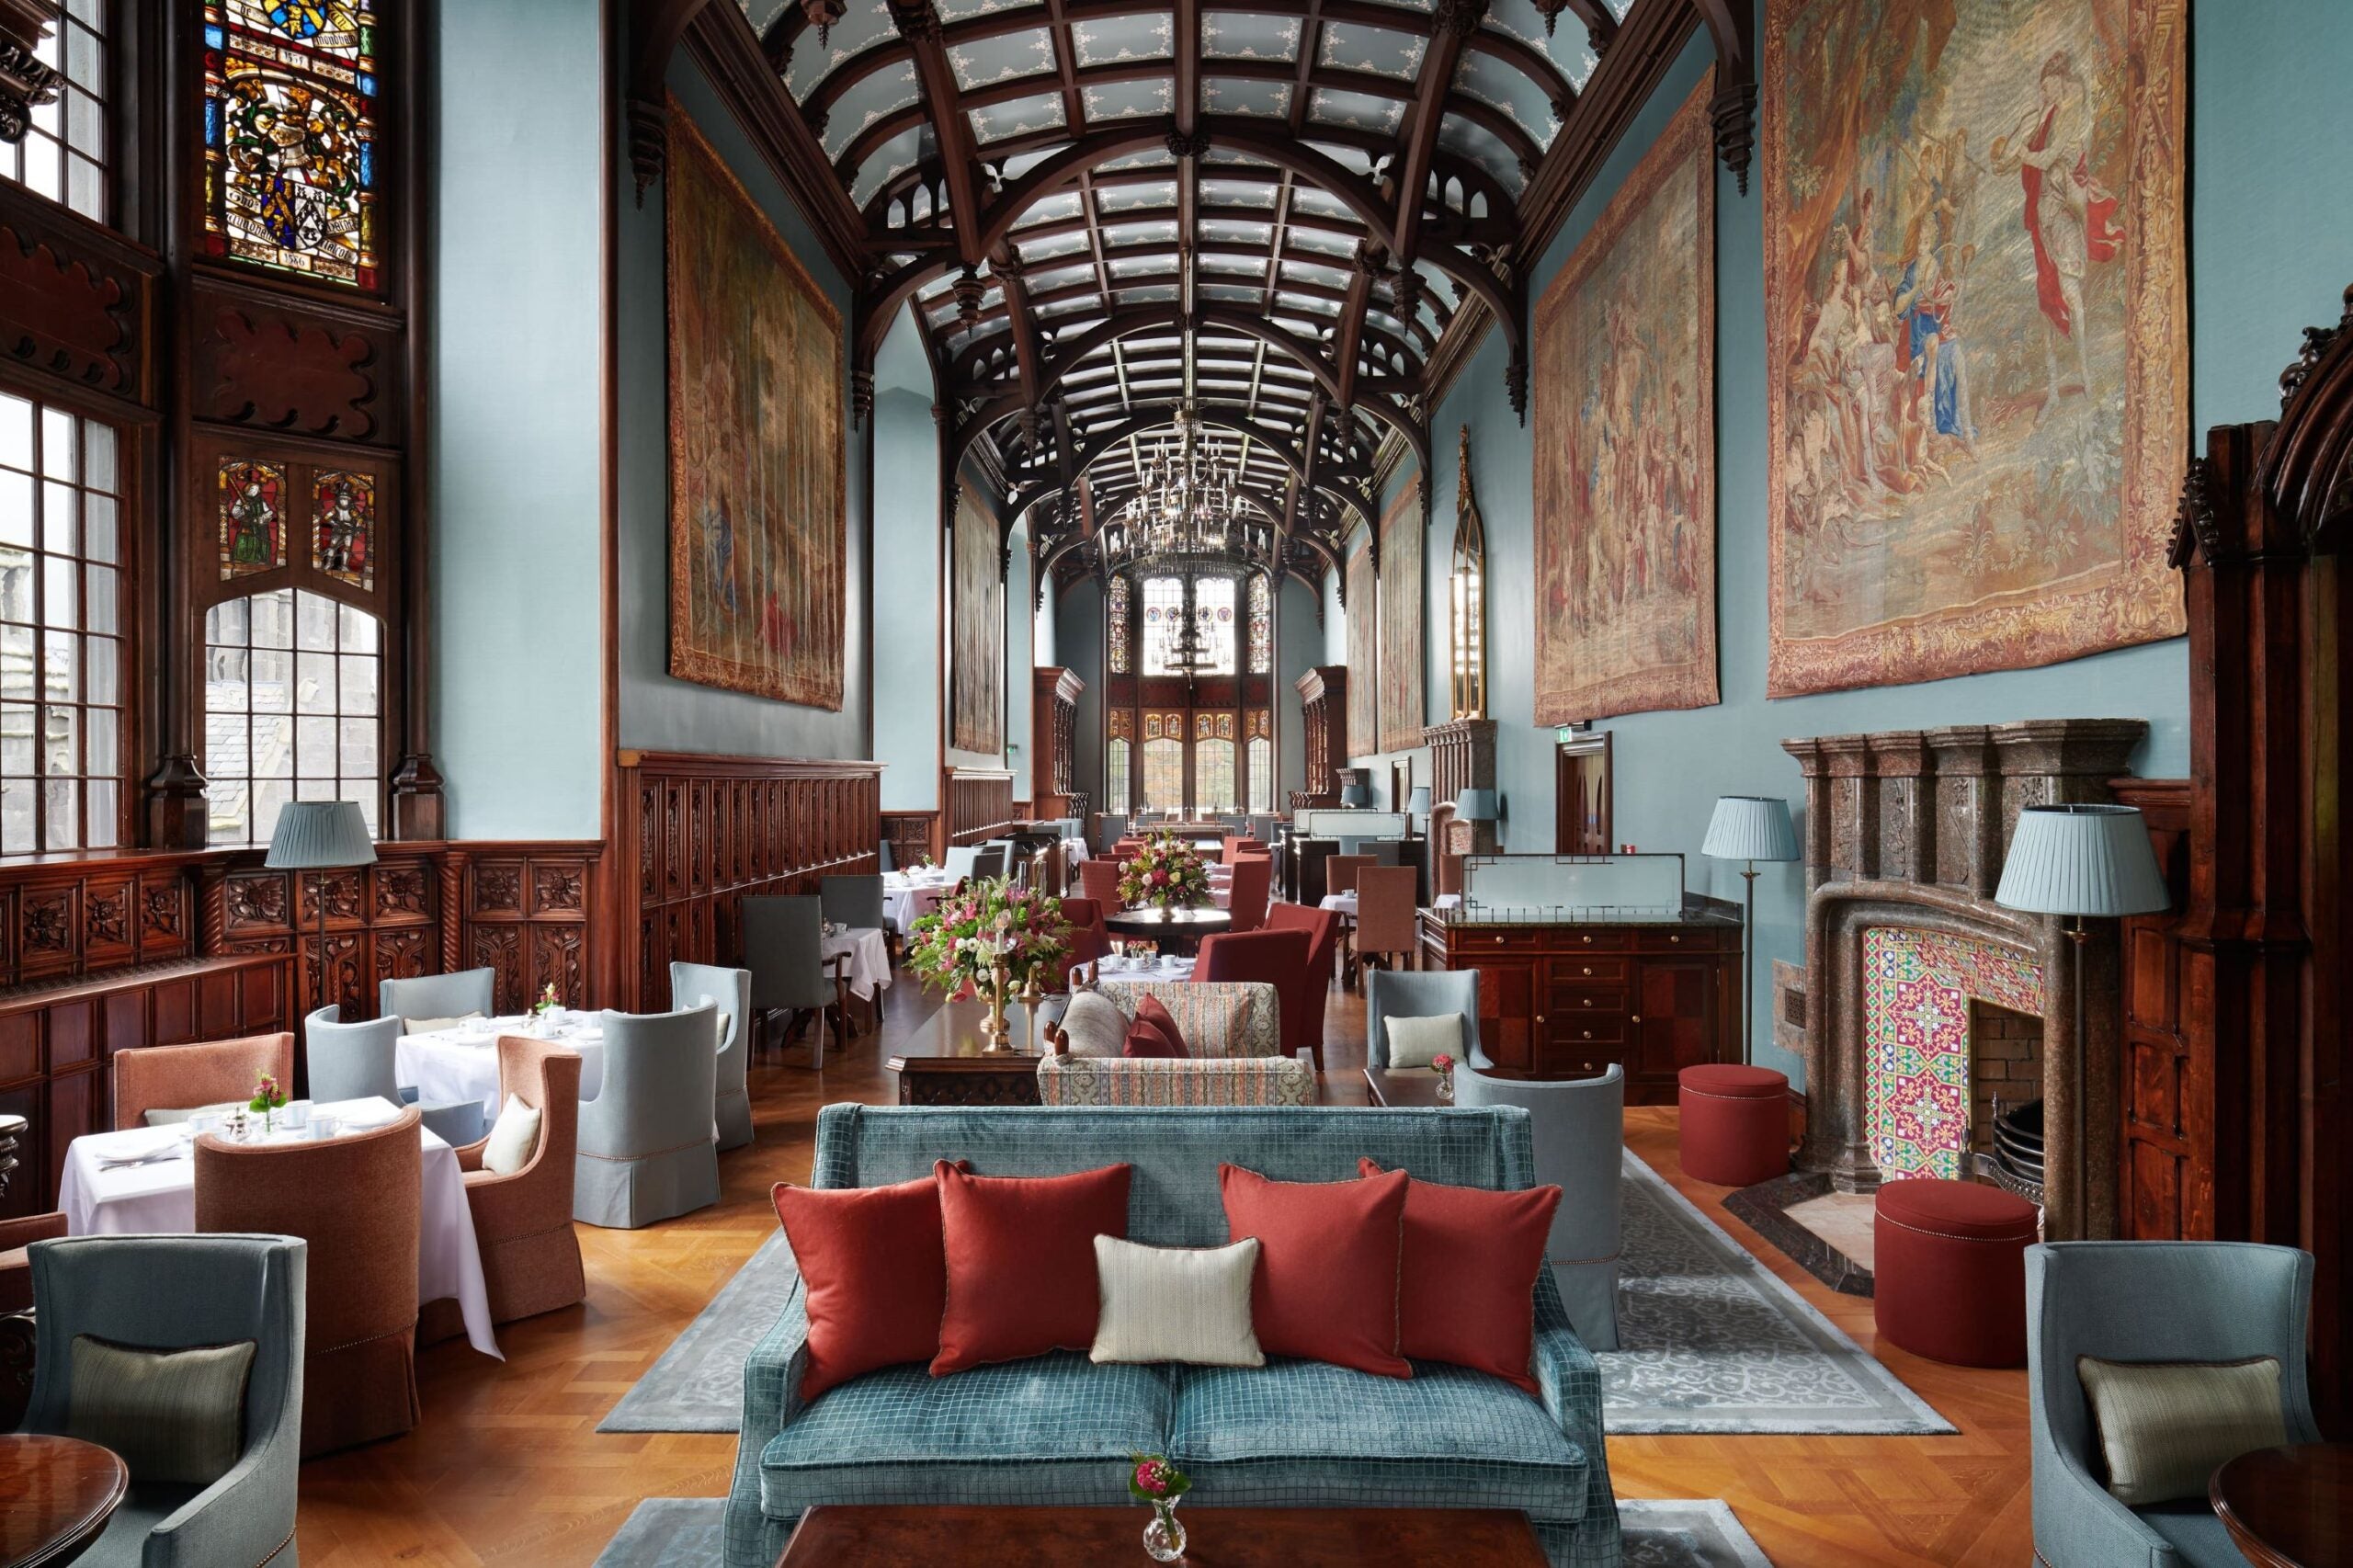 The Gallery at Adare Manor